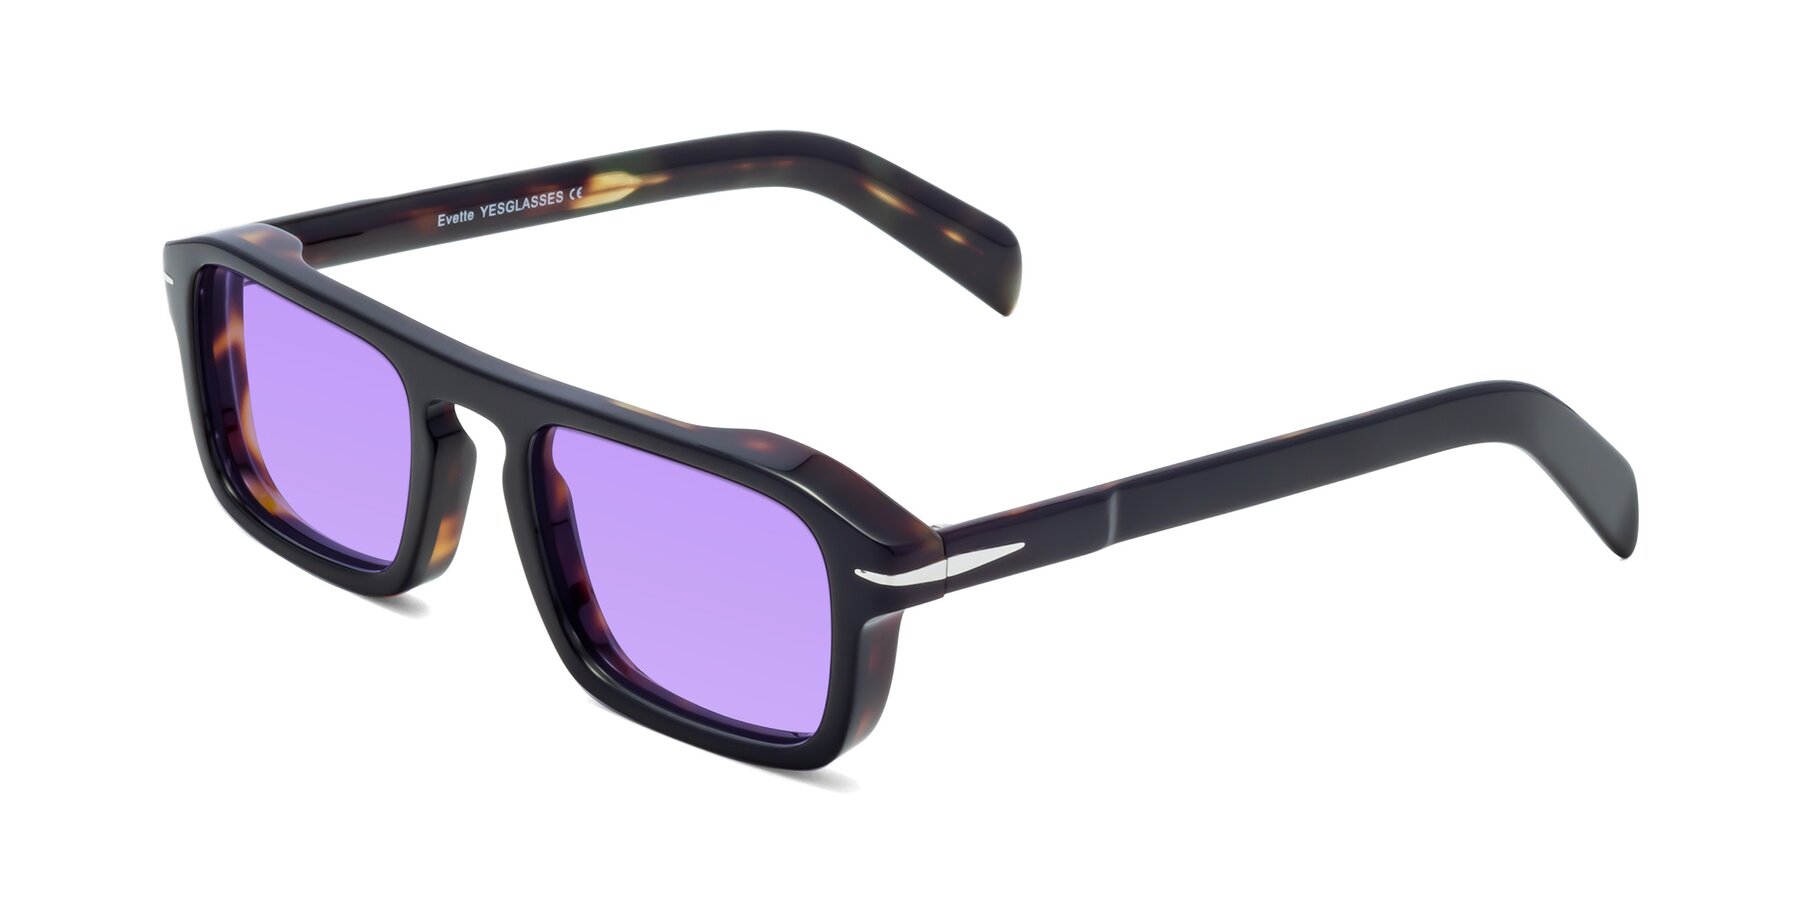 Angle of Evette in Black-Tortoise with Medium Purple Tinted Lenses